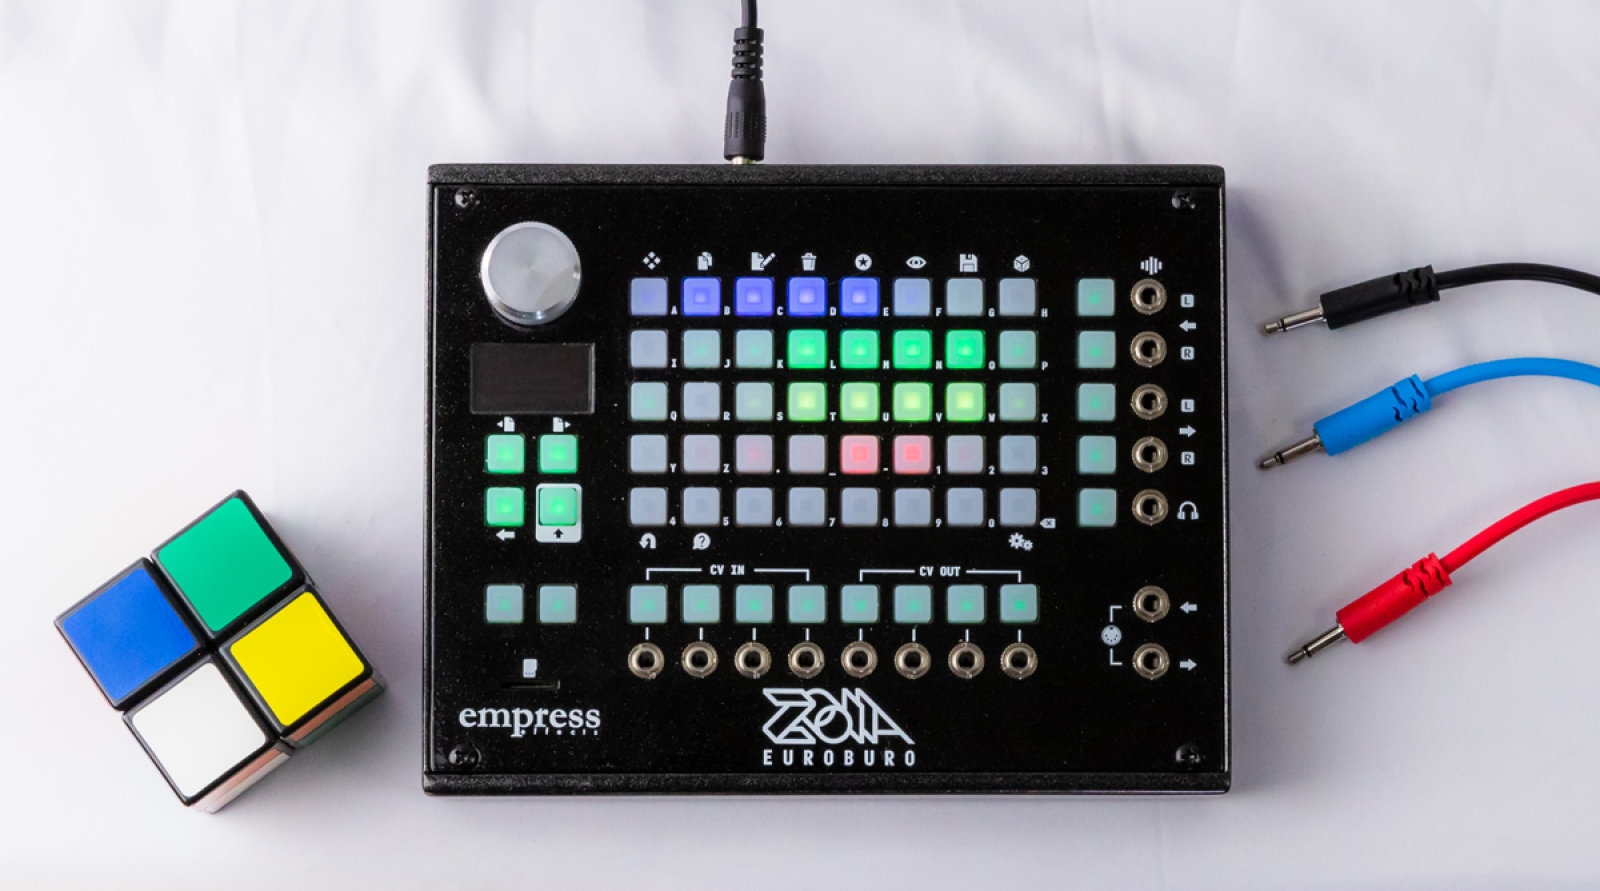 ZOIA Euroburo is a modular synth you can put inside your modular synth | DeviceDaily.com